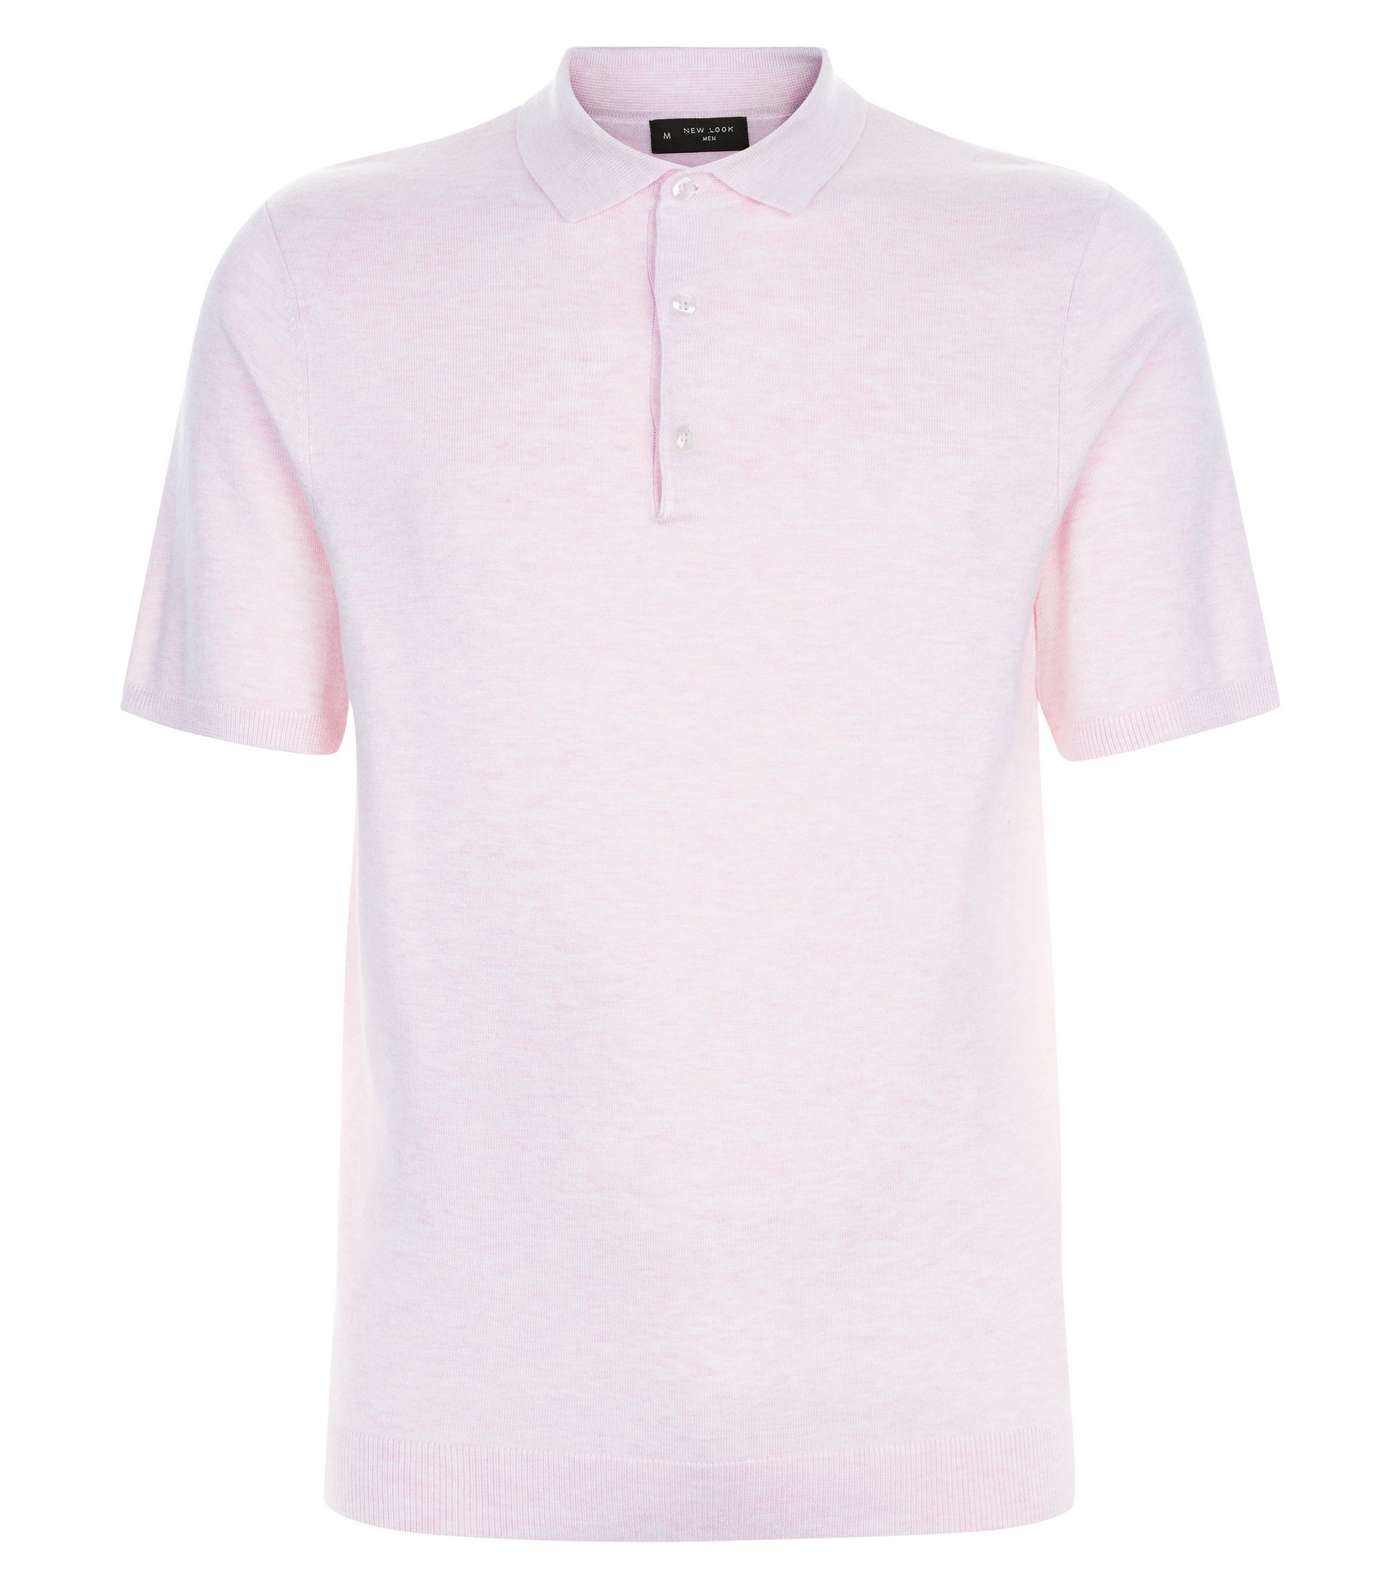 Pink Knit Muscle Fit Polo Shirt Image 4